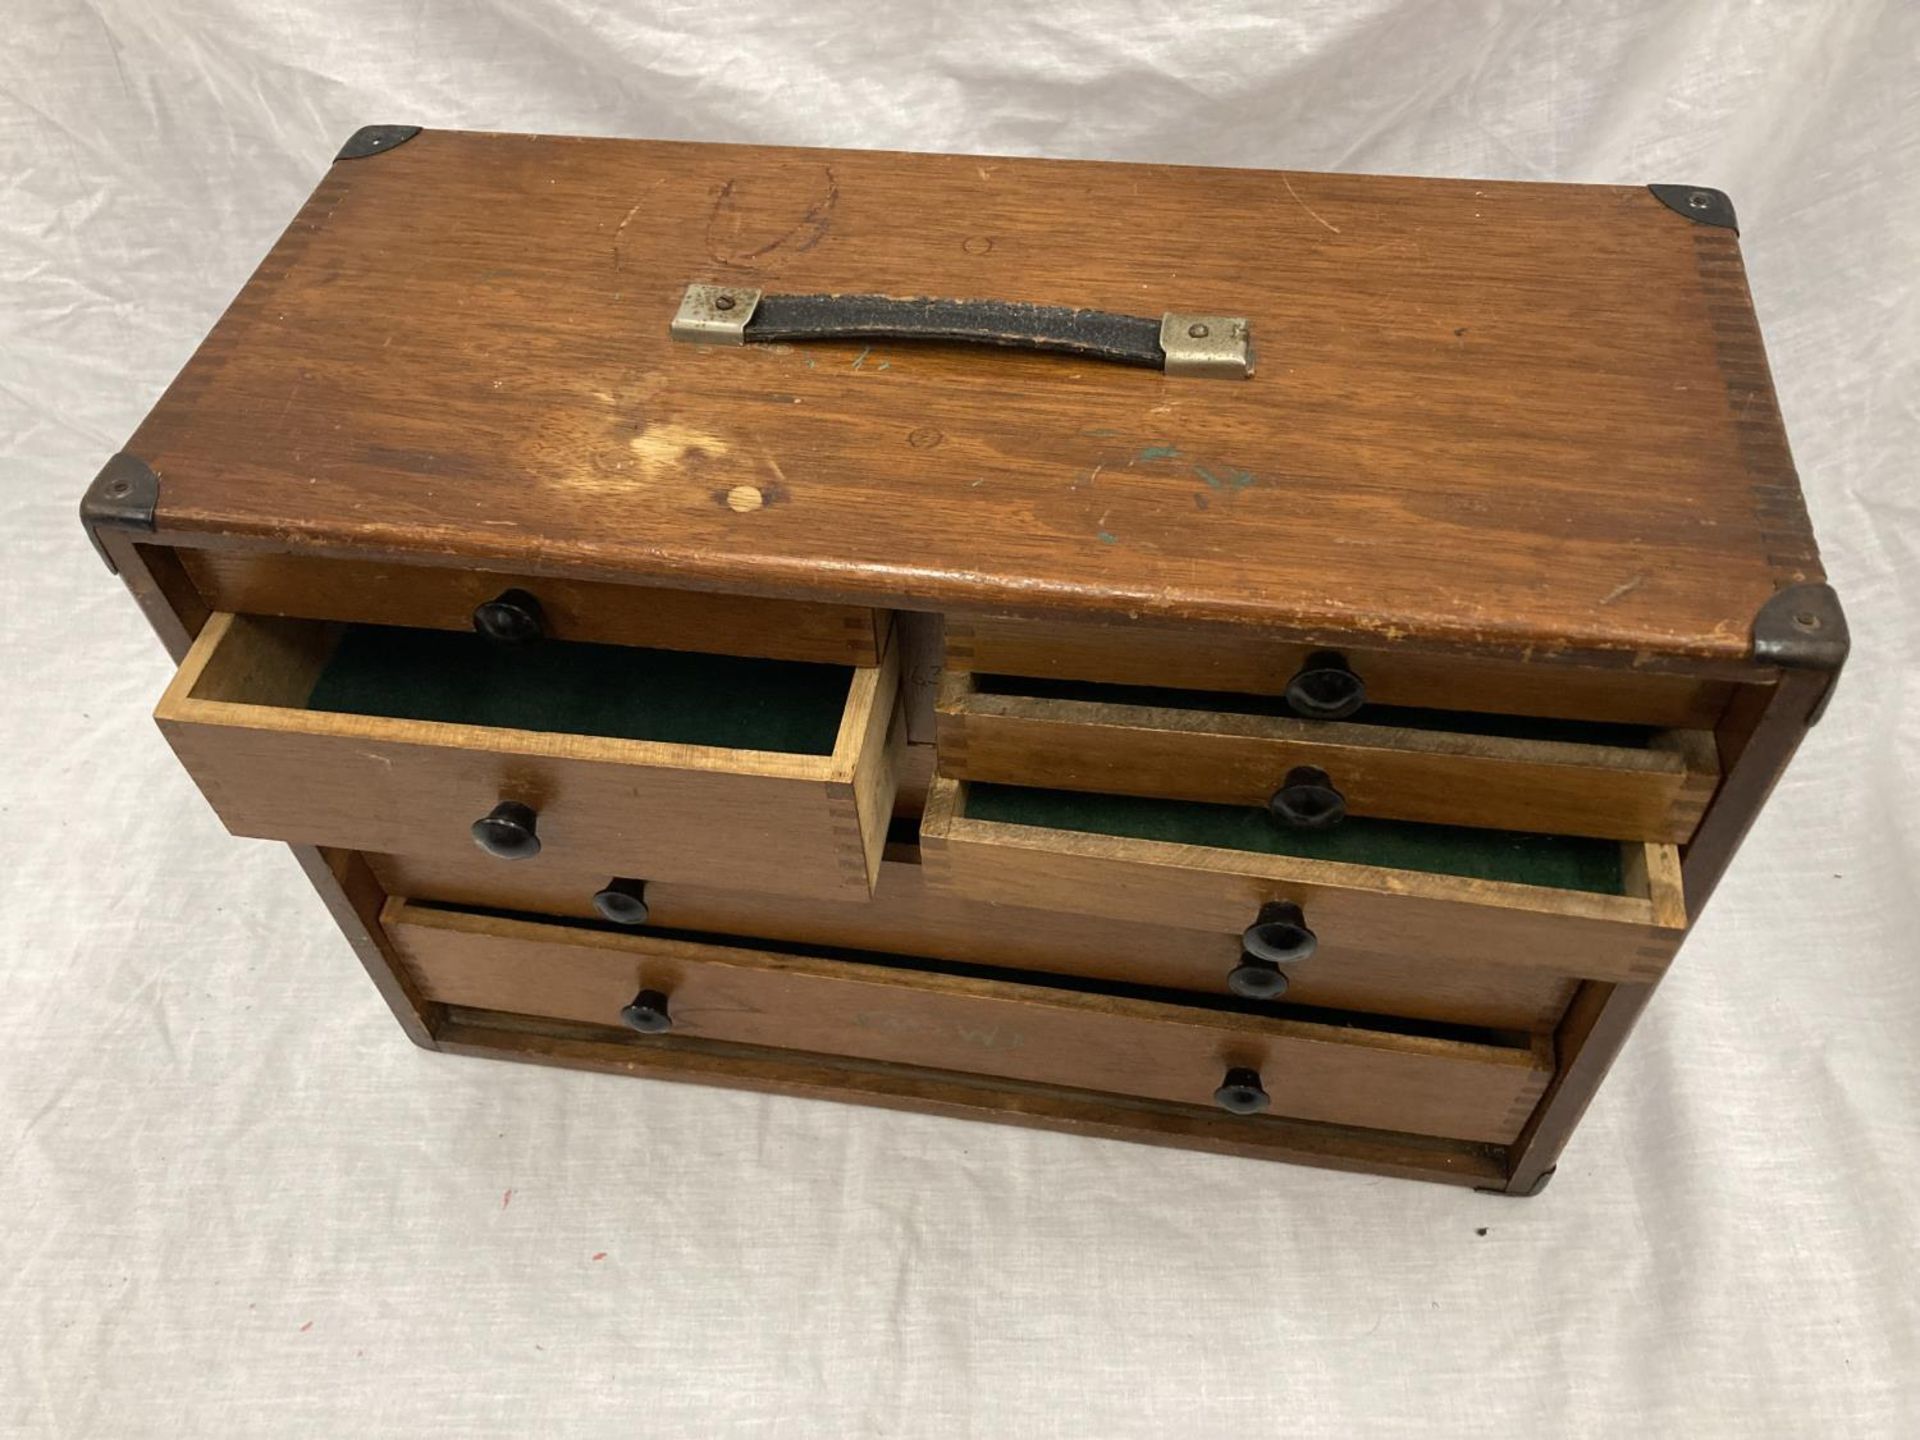 A VINTAGE MAHOGANY ENGINEERS CHEST WITH DOVE TAILED JOINTS AND METAL CORNERS. WITH MAKERS MARK M & - Image 6 of 8